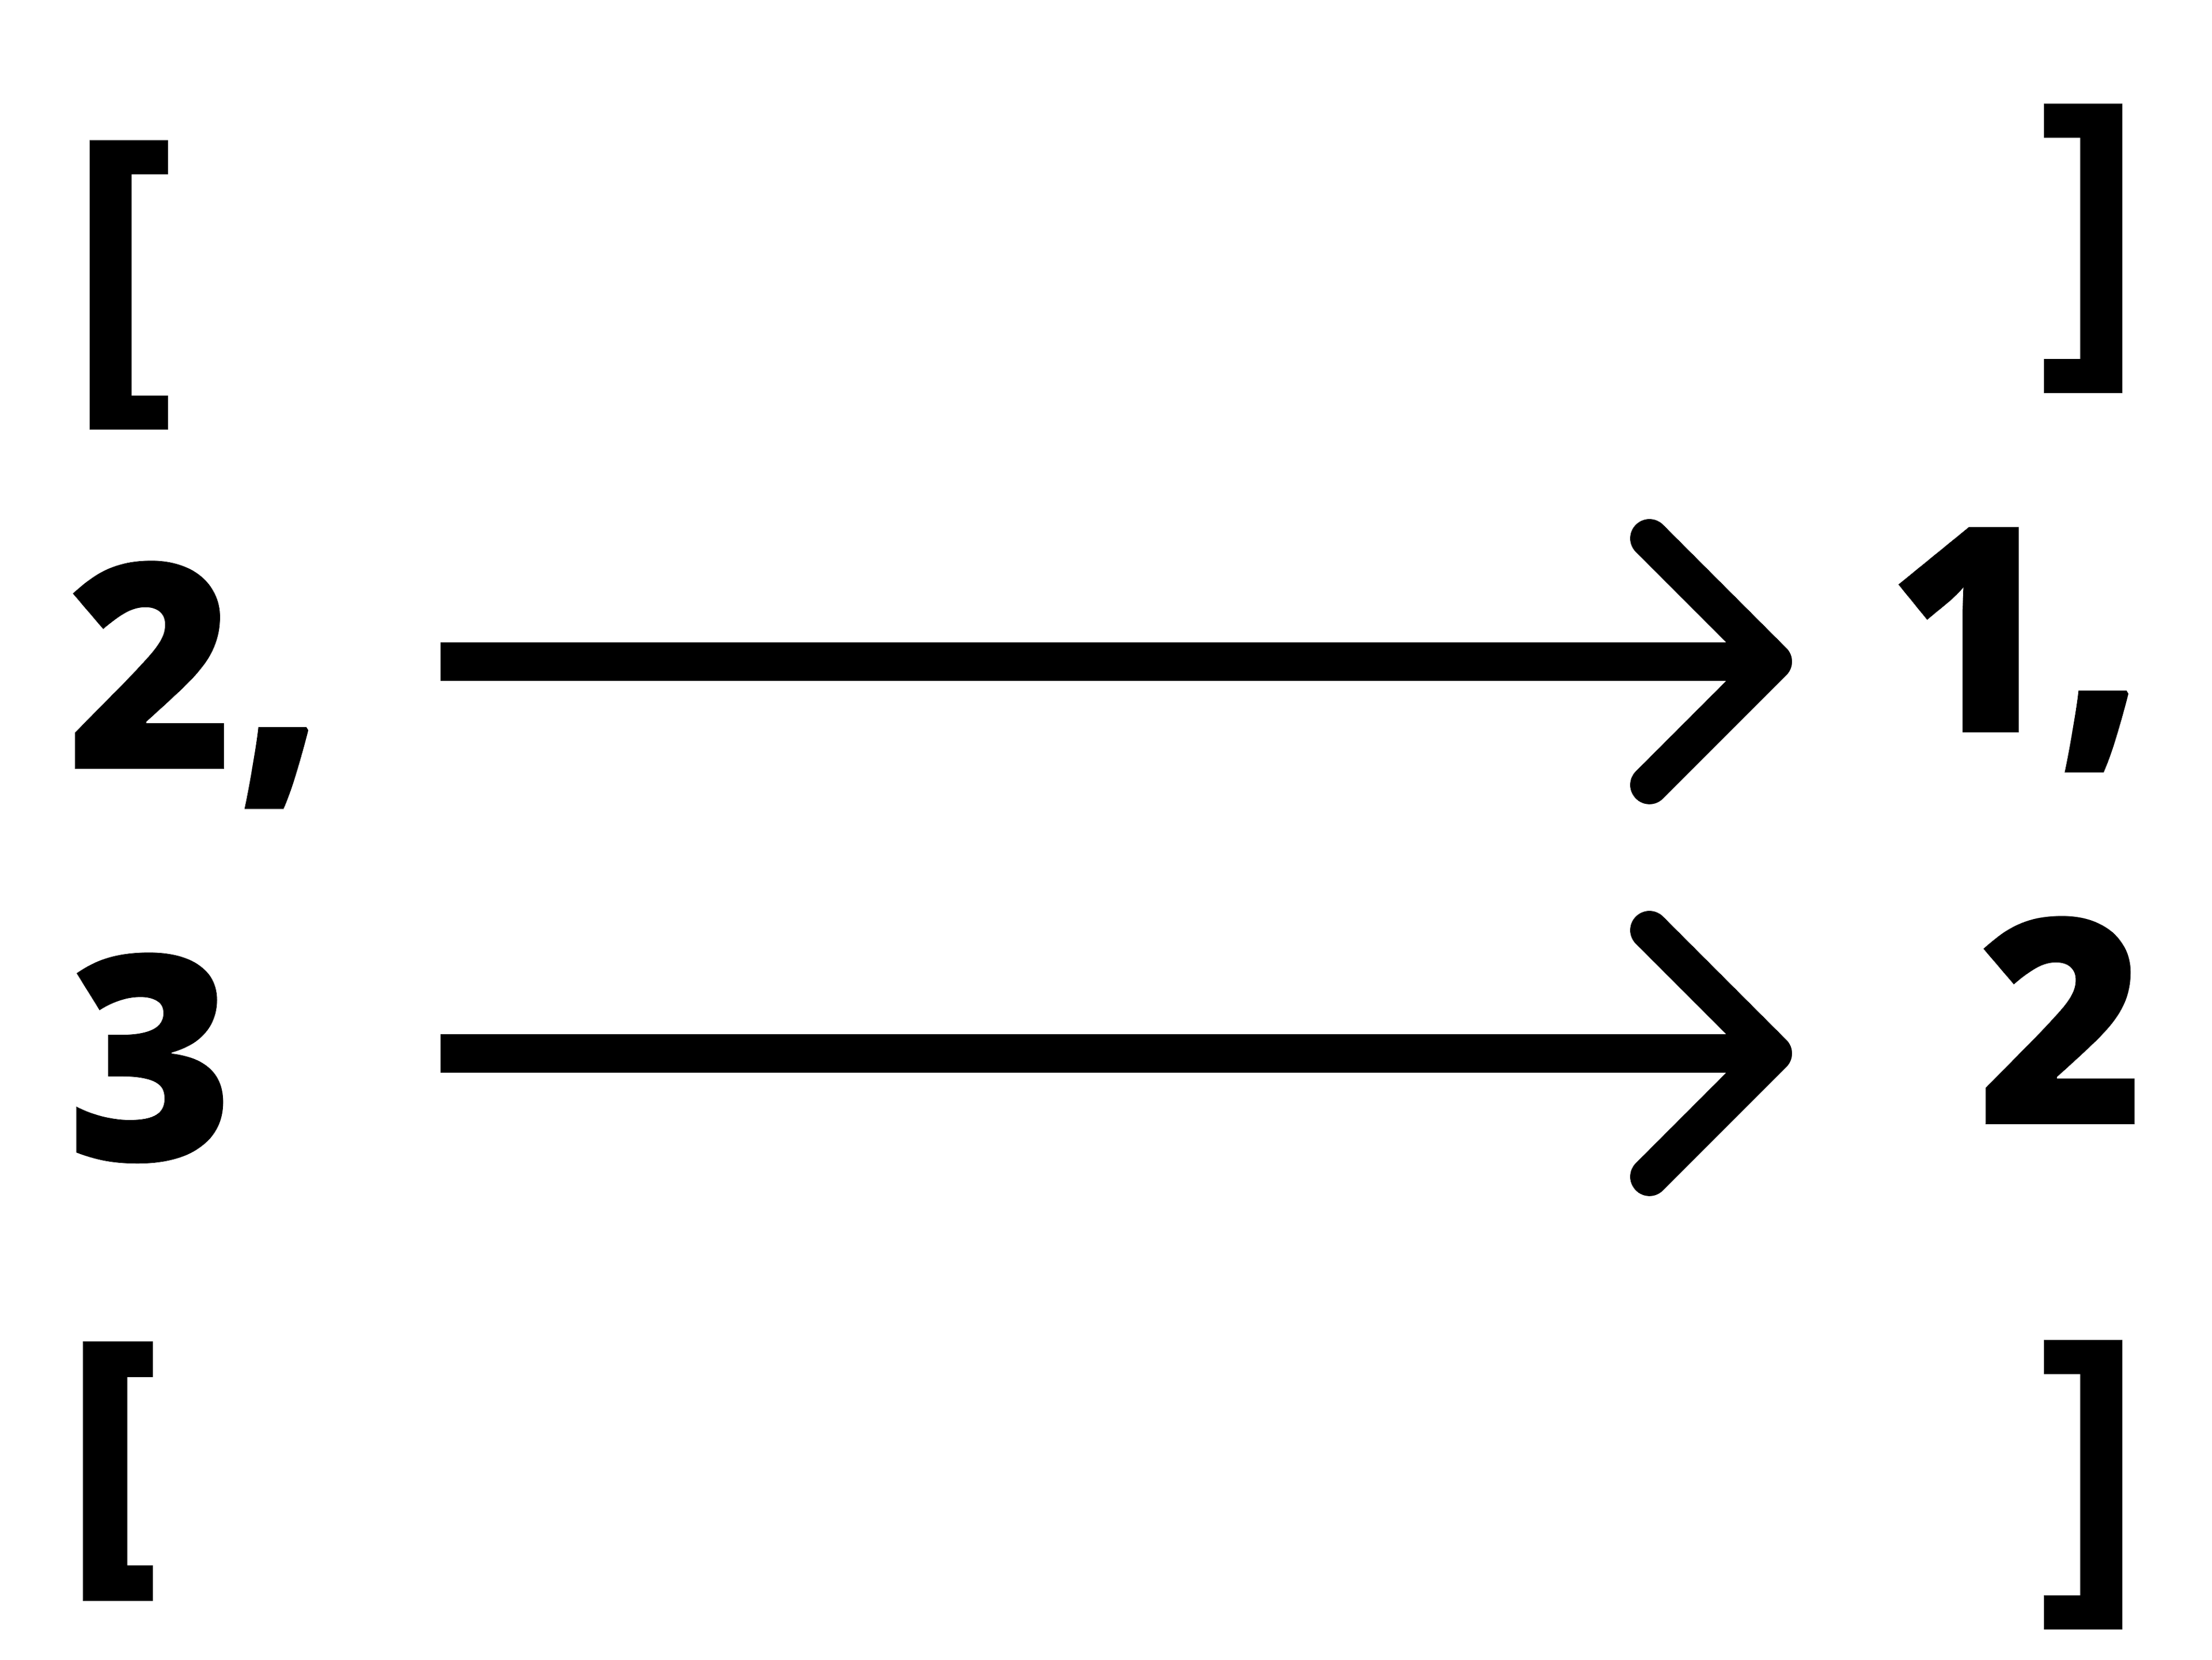 Diagram of how inputs and outputs flow